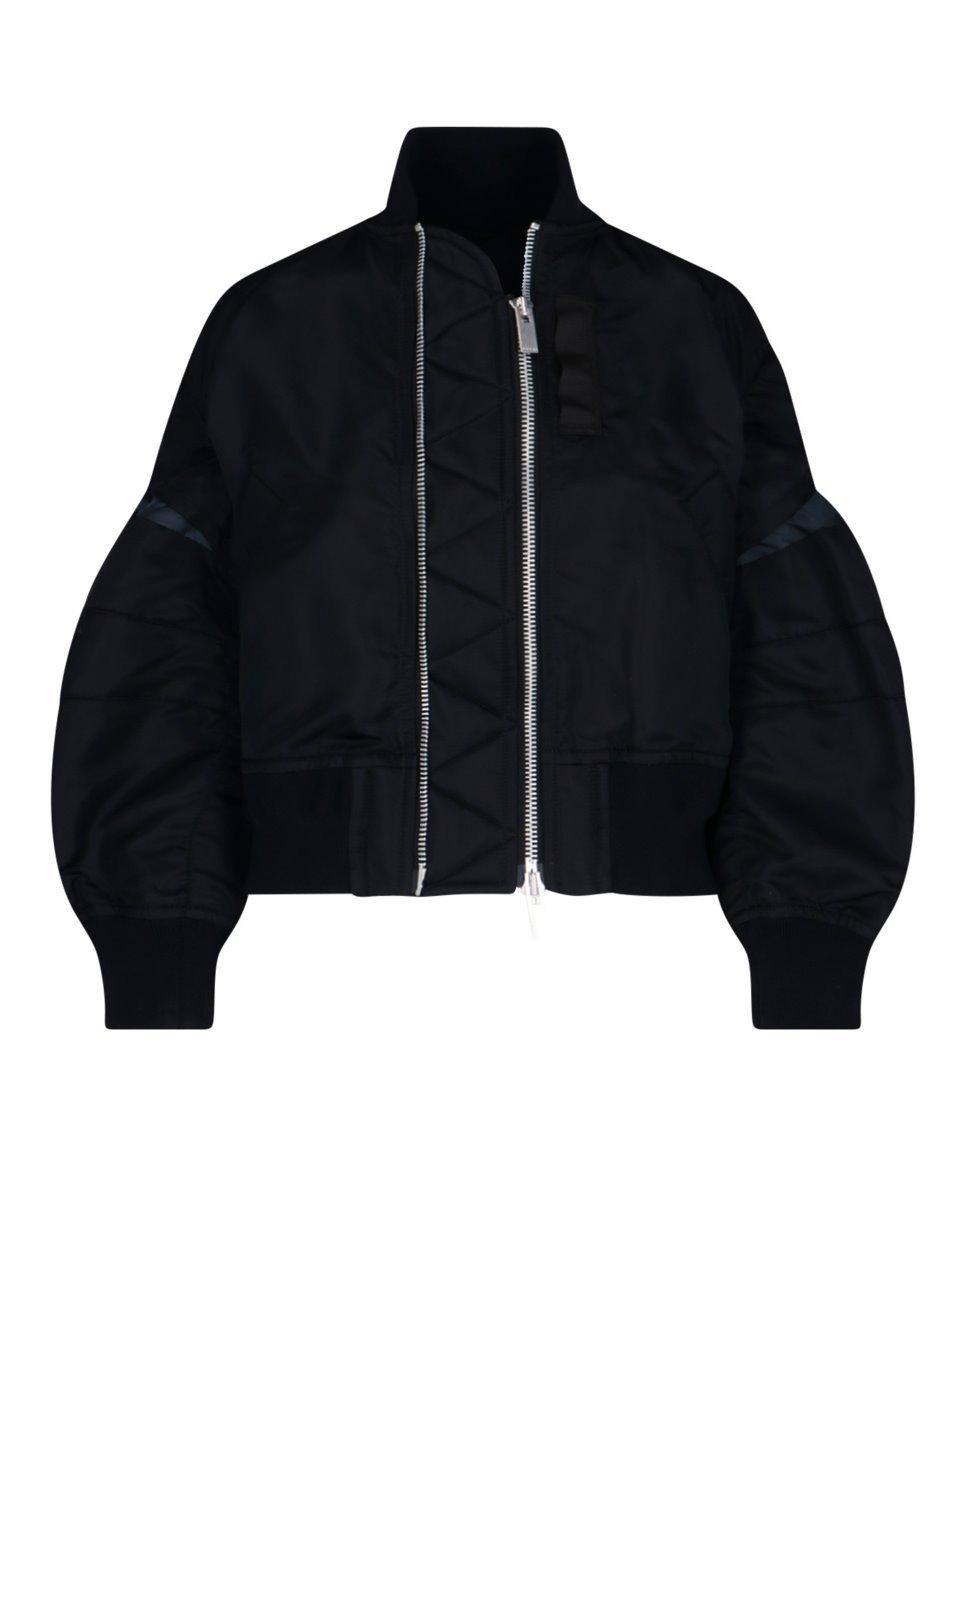 Sacai Synthetic Billow Sleeves Bomber Jacket in Black - Lyst